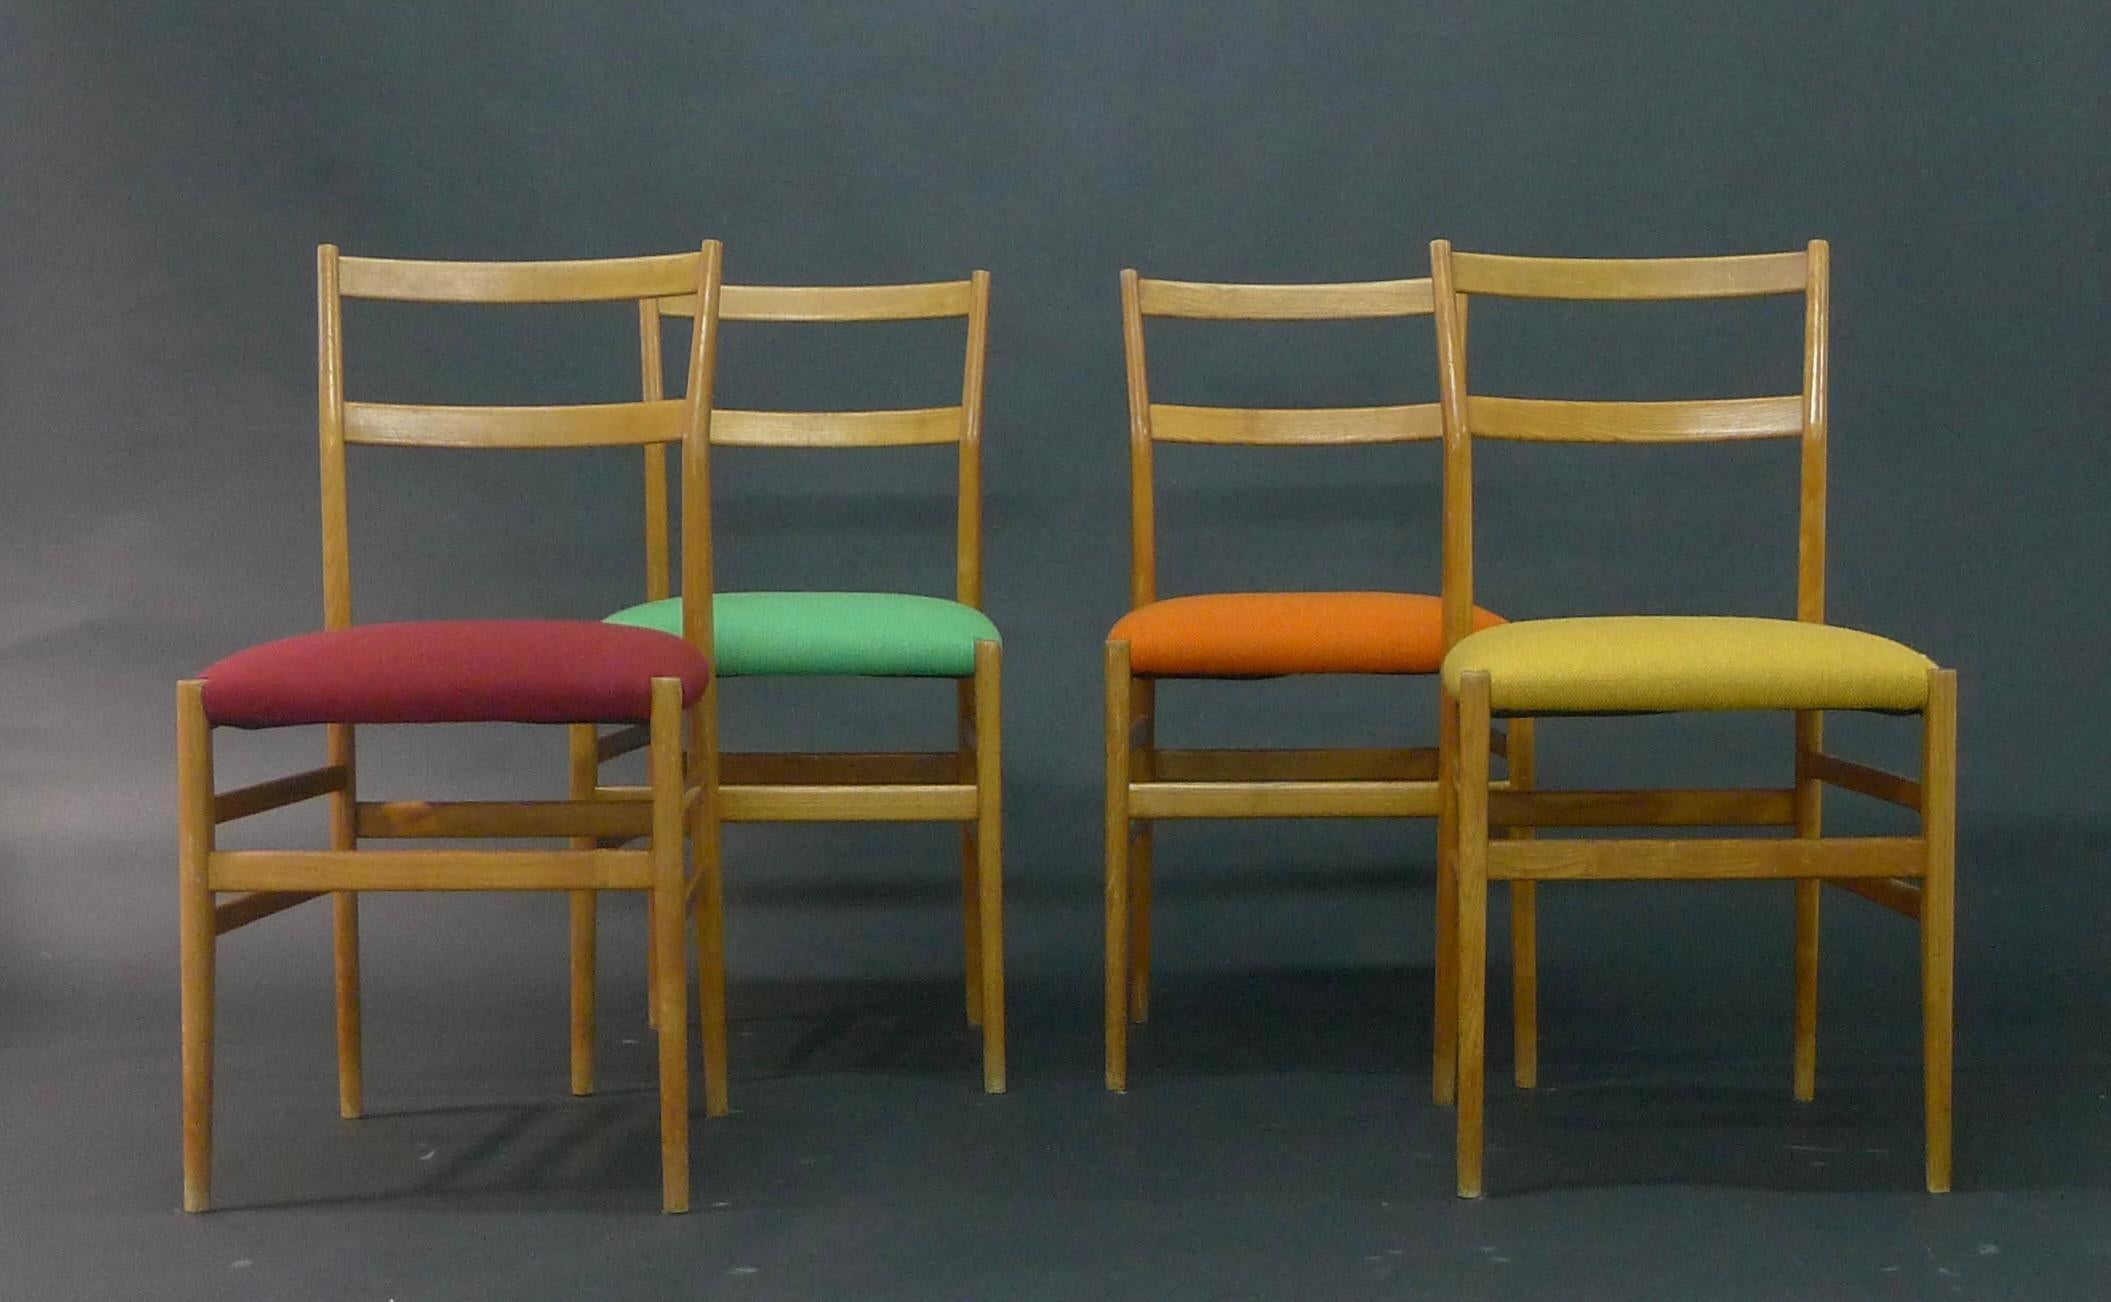 Gio Ponti for Cassina, Harlequin Set of Leggera Chairs, Model 646 in Ash, 1950s For Sale 2